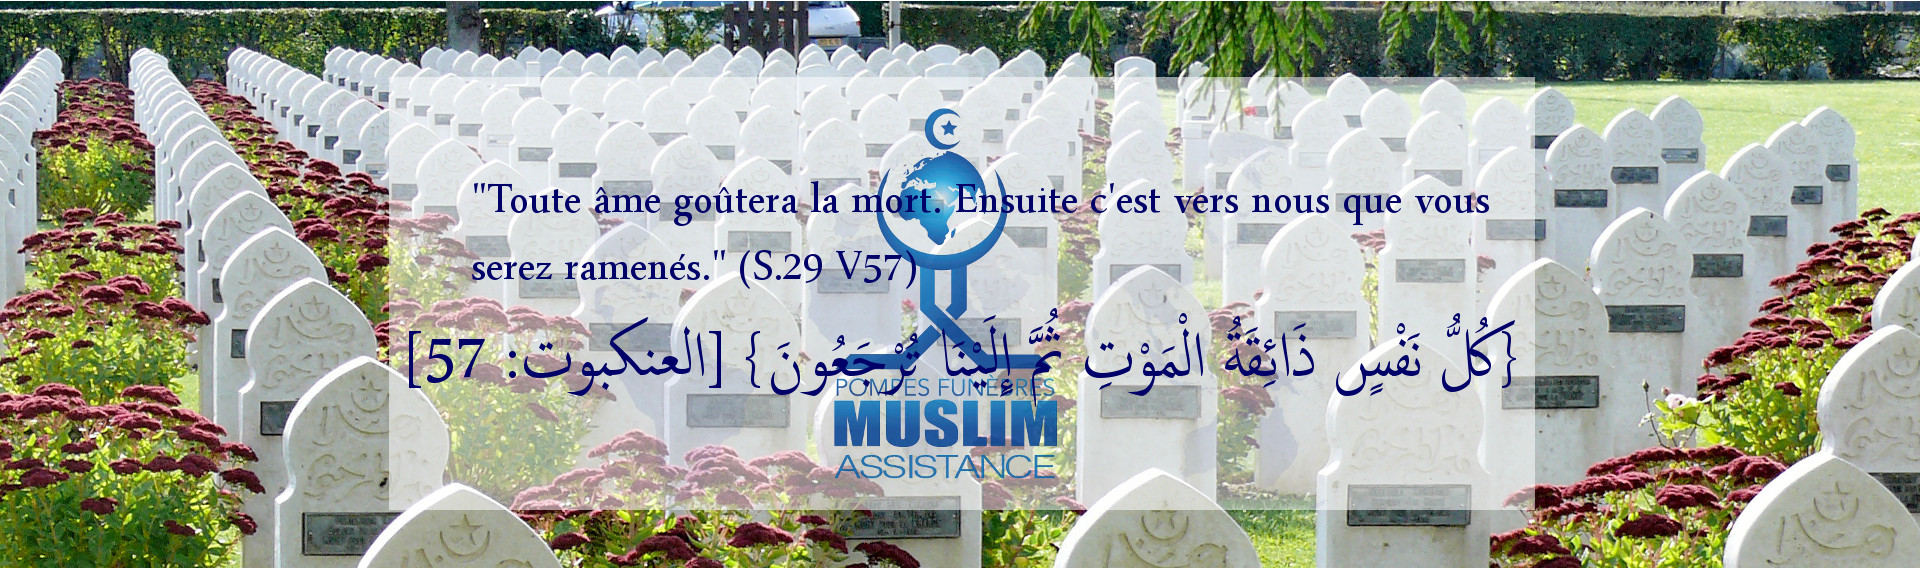 Muslim Assistance Groupe